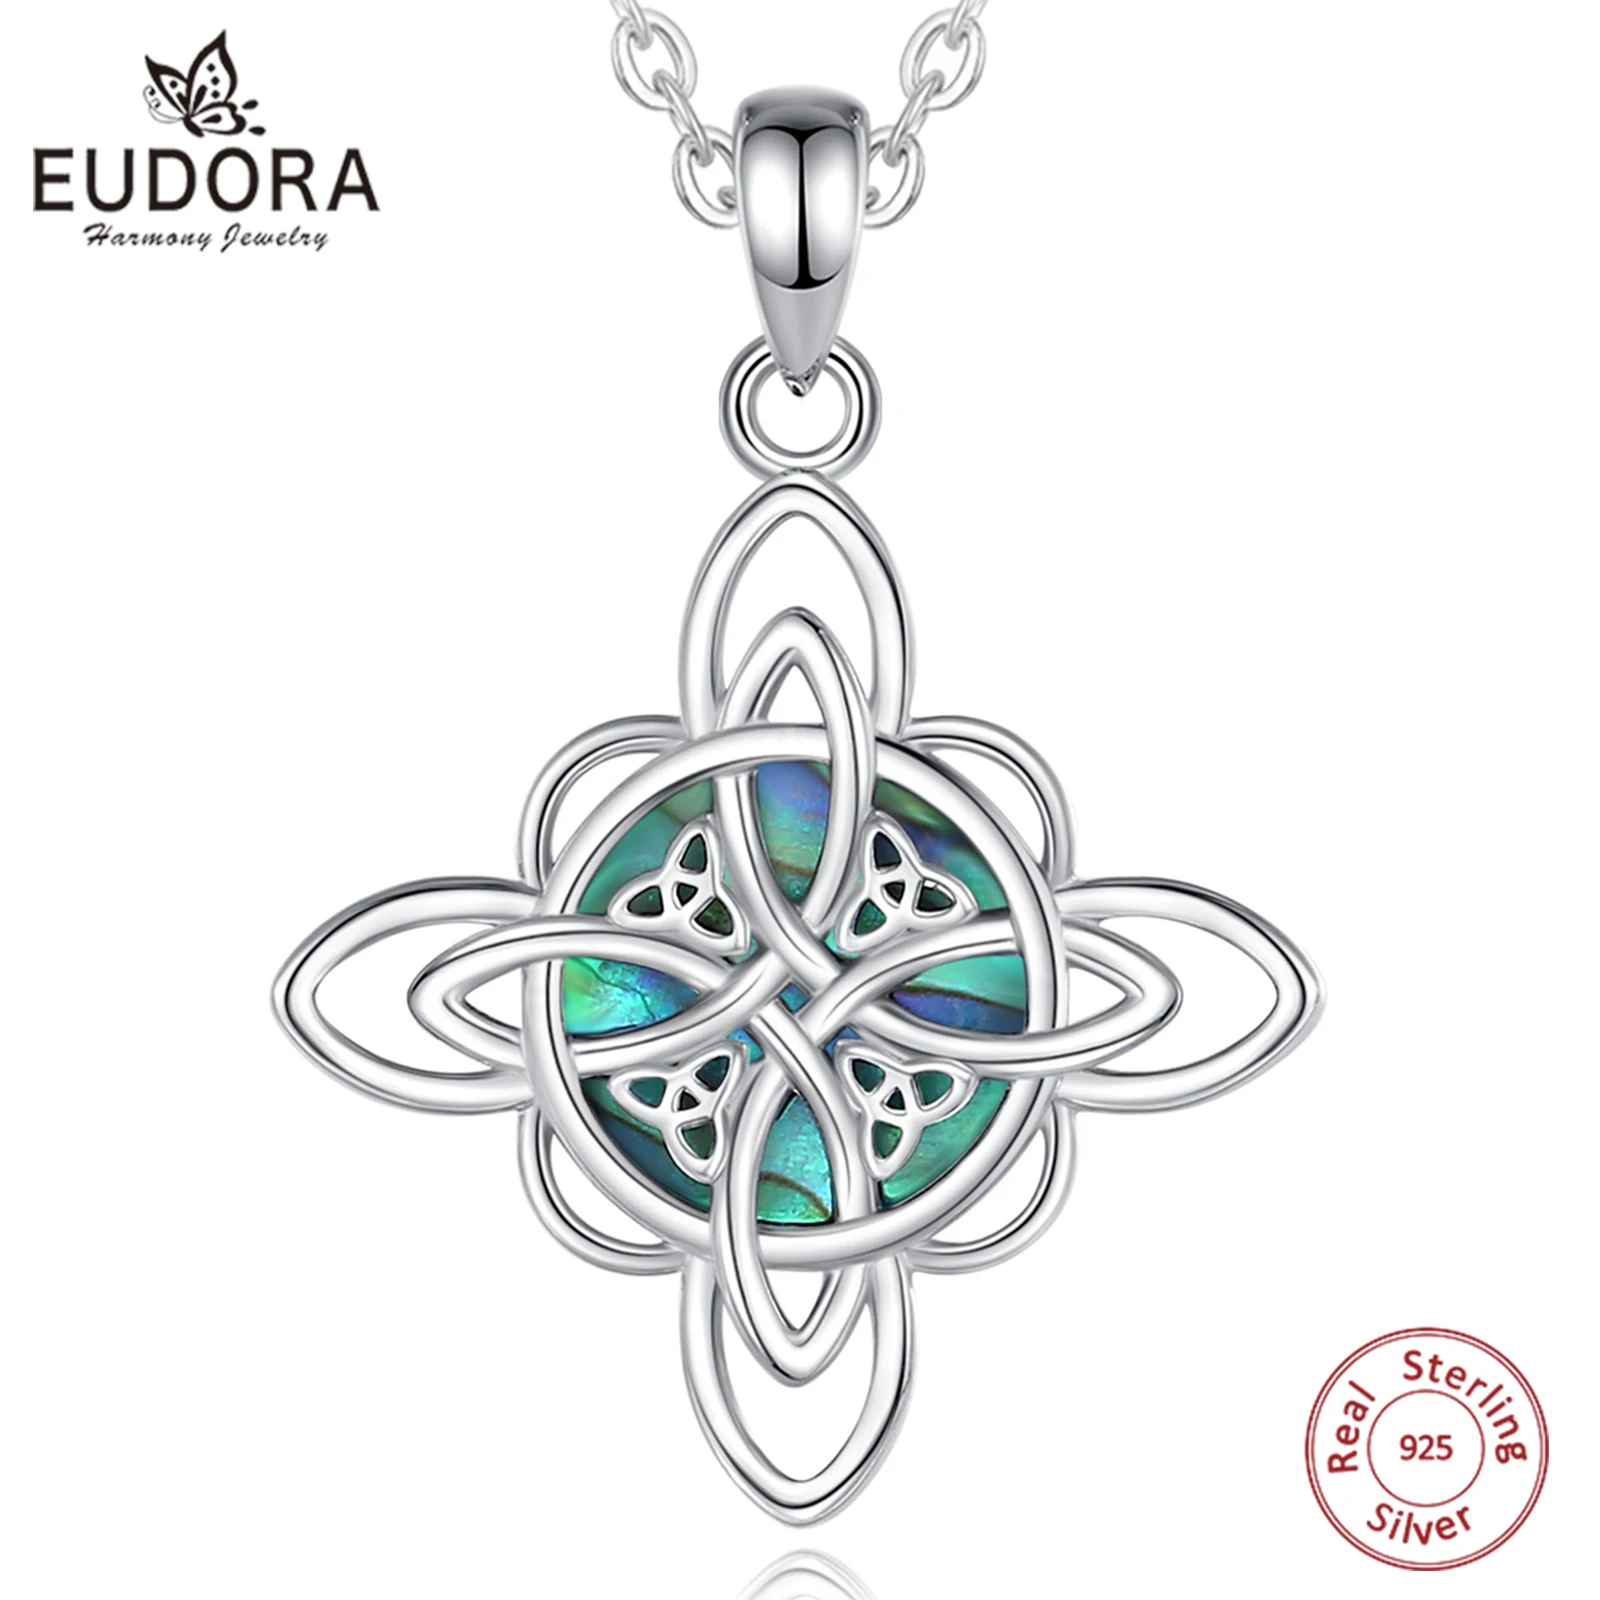 

Eudora 925 Sterling Silver Witch Knot Necklace for Men Women Natural Abalone Shell Witchcraft Amulet Pendant Wicca Jewelry Gift